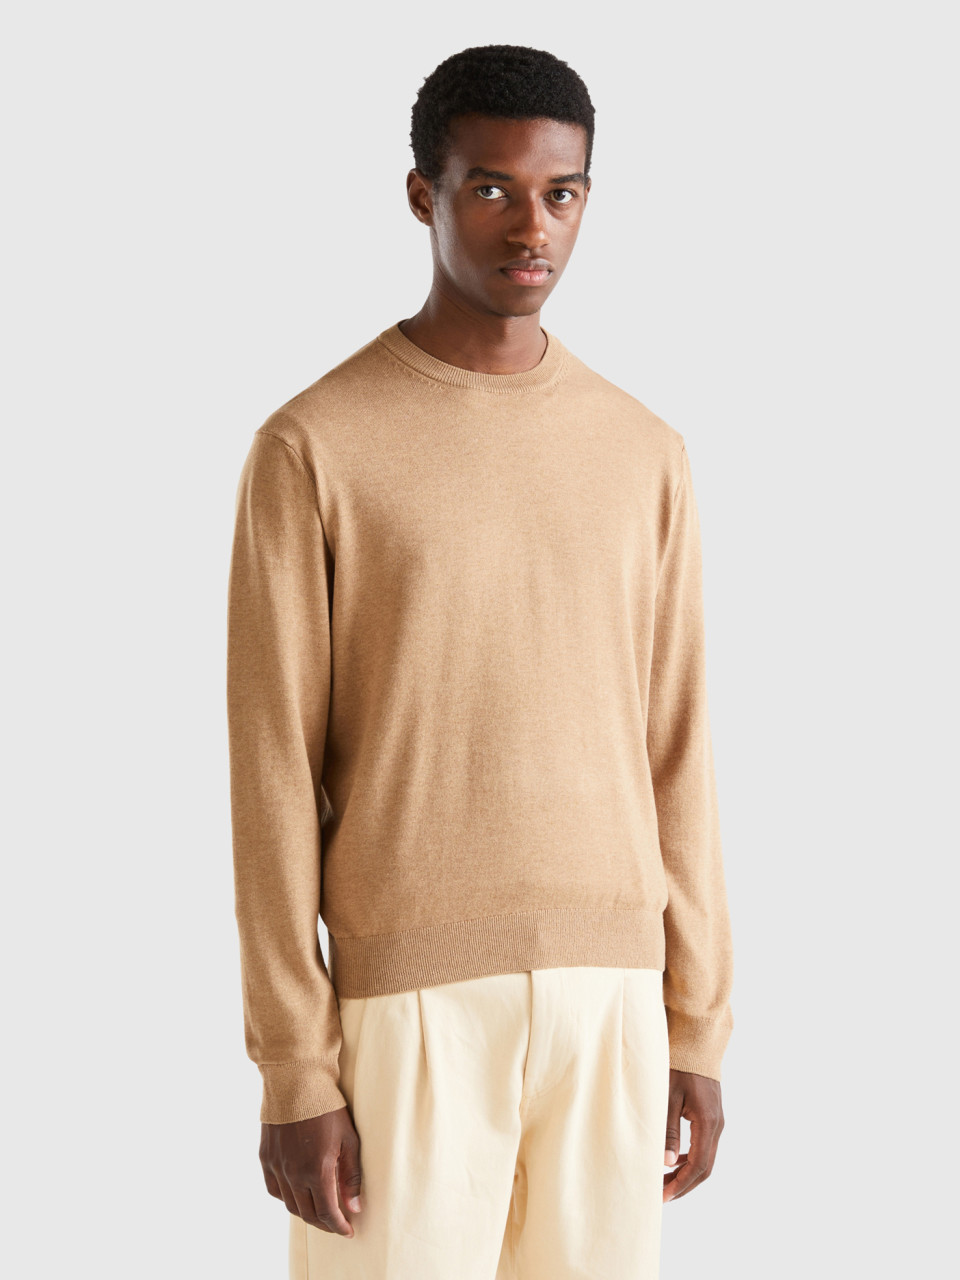 Benetton, Cotton And Wool Crew Neck Sweater, Camel, Men